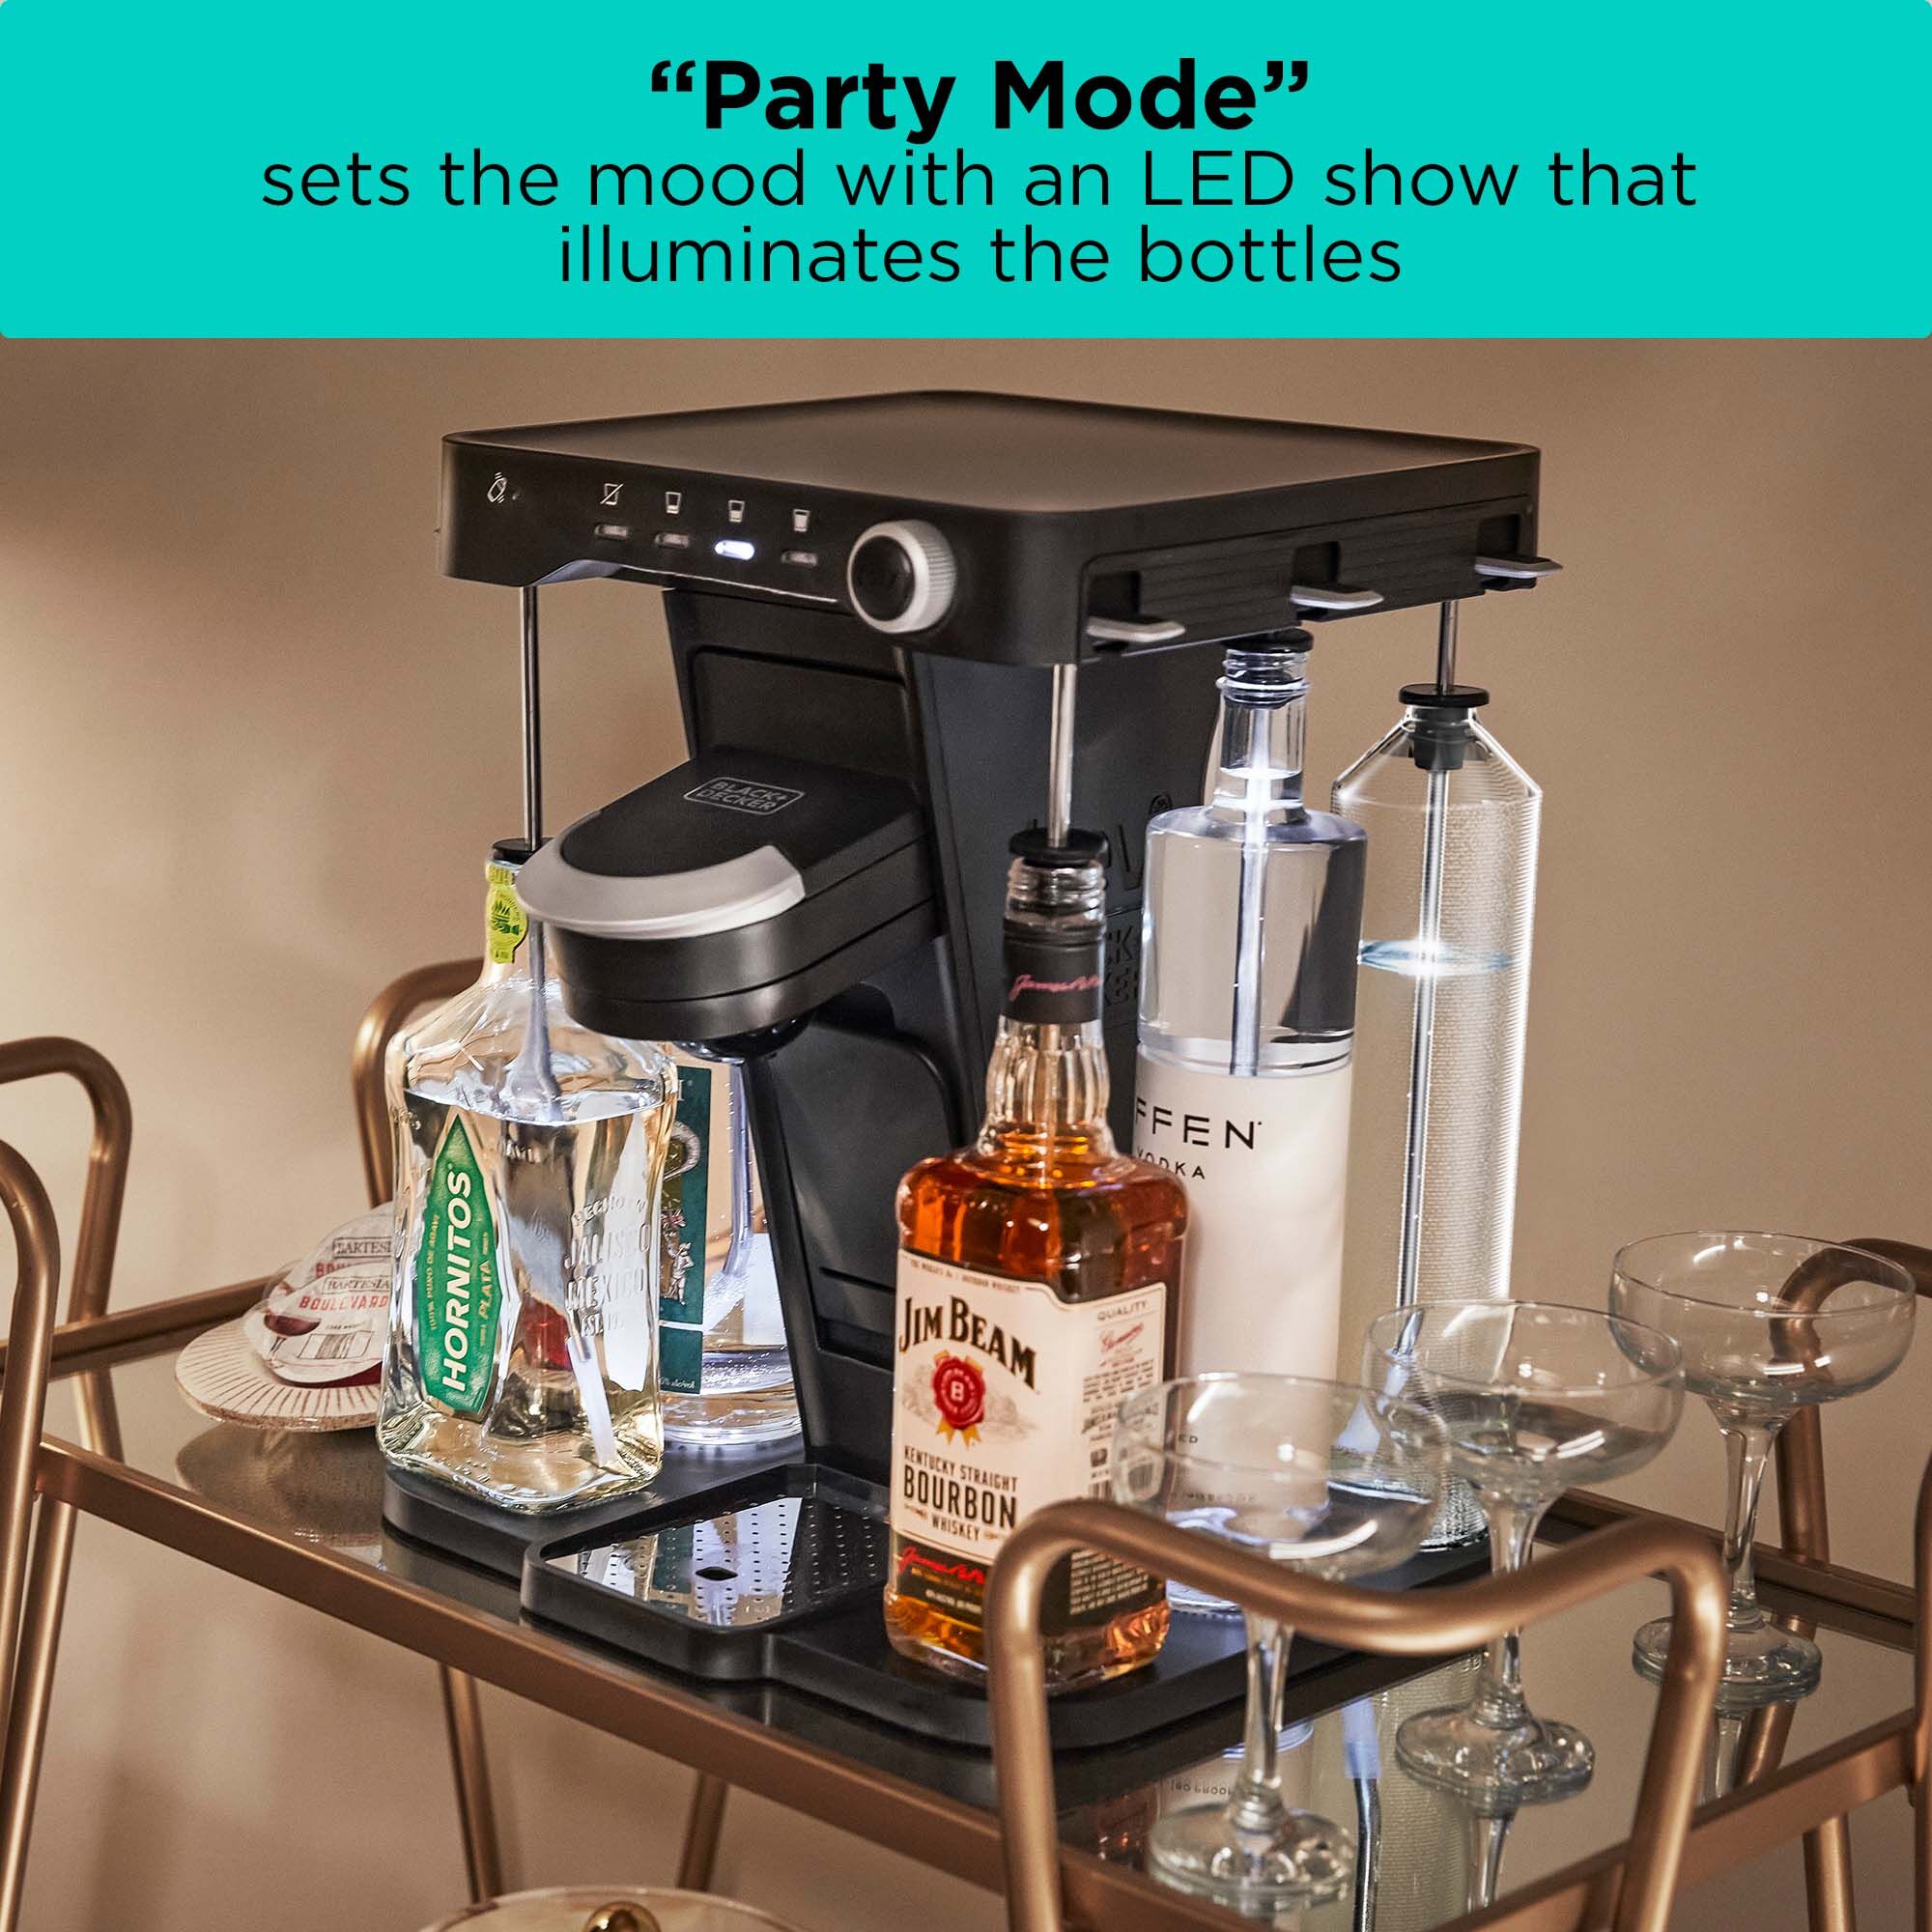 bev by BLACK+DECKER\u2122 cocktail maker sitting on a bar cart with illuminated bottles; text reads 